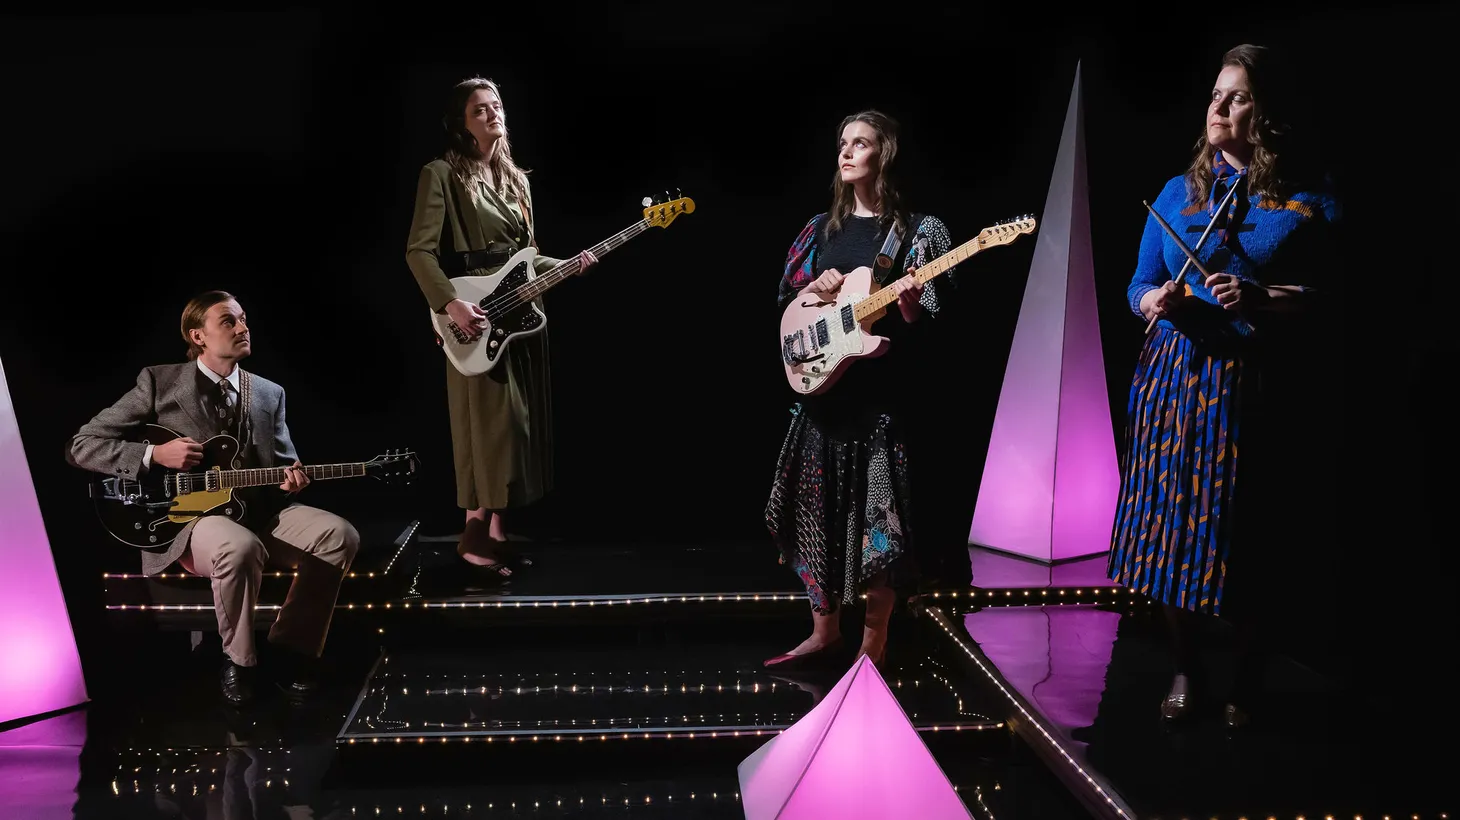 Hailing from the coldest part of landlocked Canada, sister trio The Garrys named themselves after their father, Garry, and braid sibling harmonies into their signature “doom-wop,” garage-surf sound, which includes their brother on their latest…